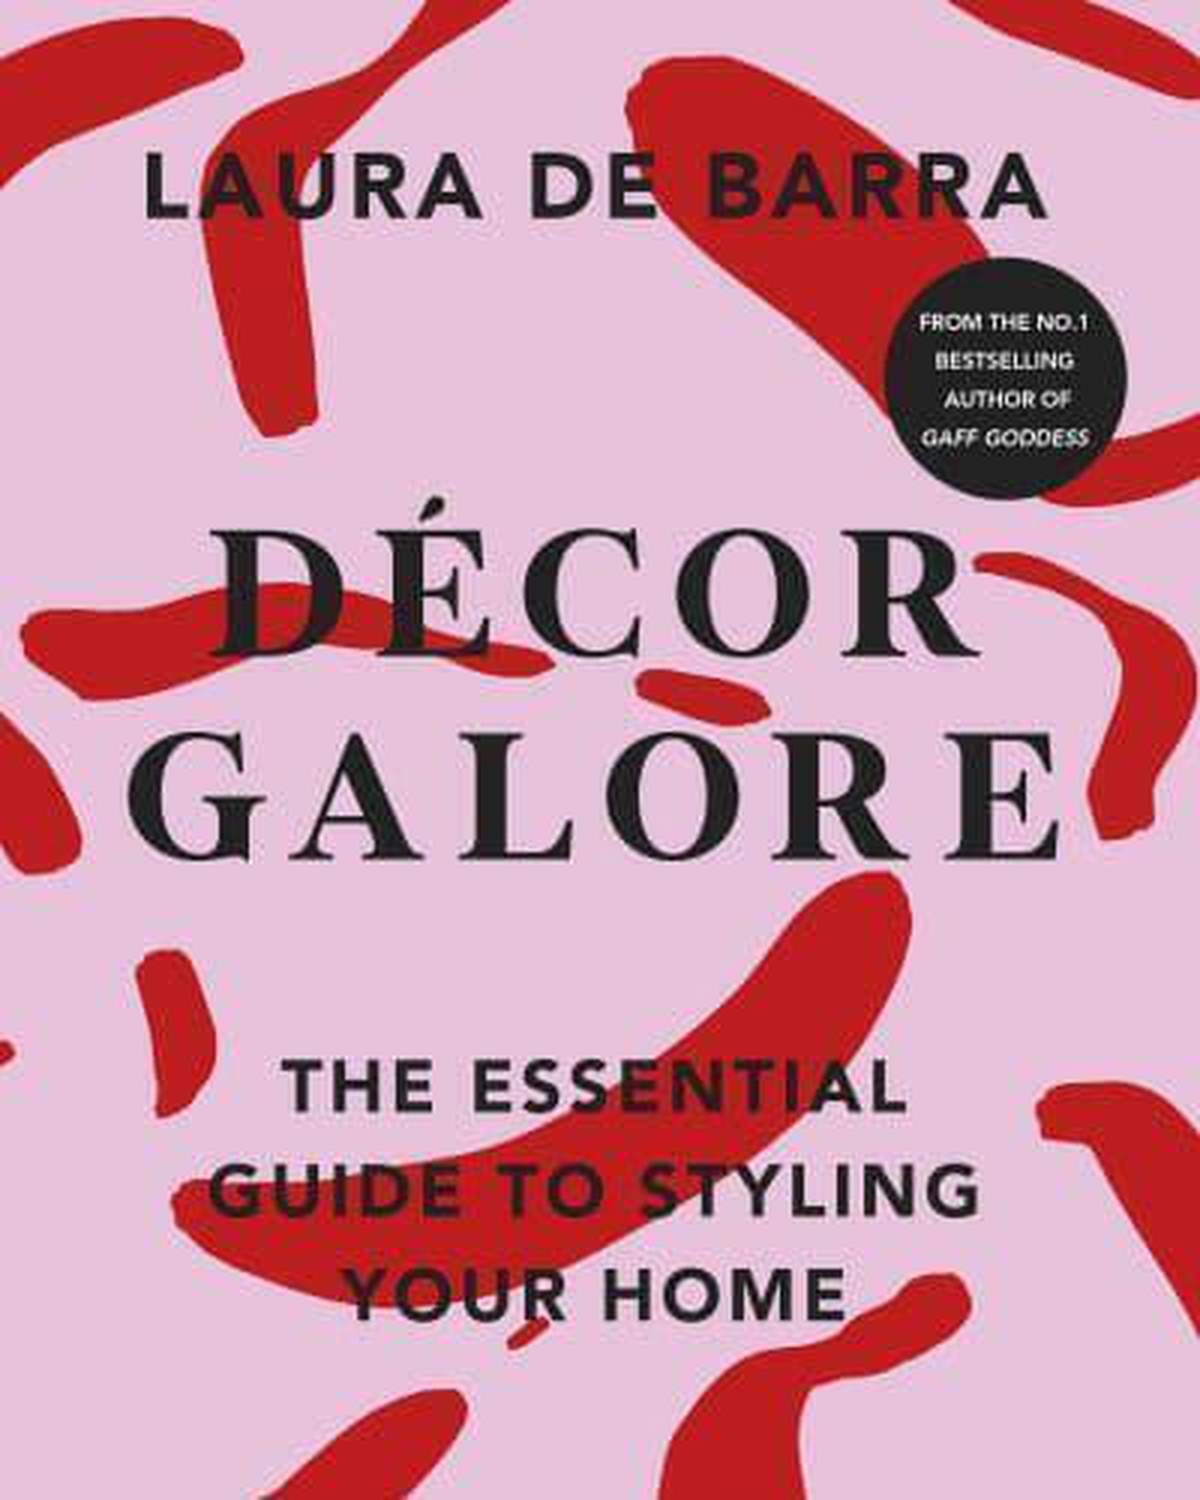 Styling your home with Laura de Barra